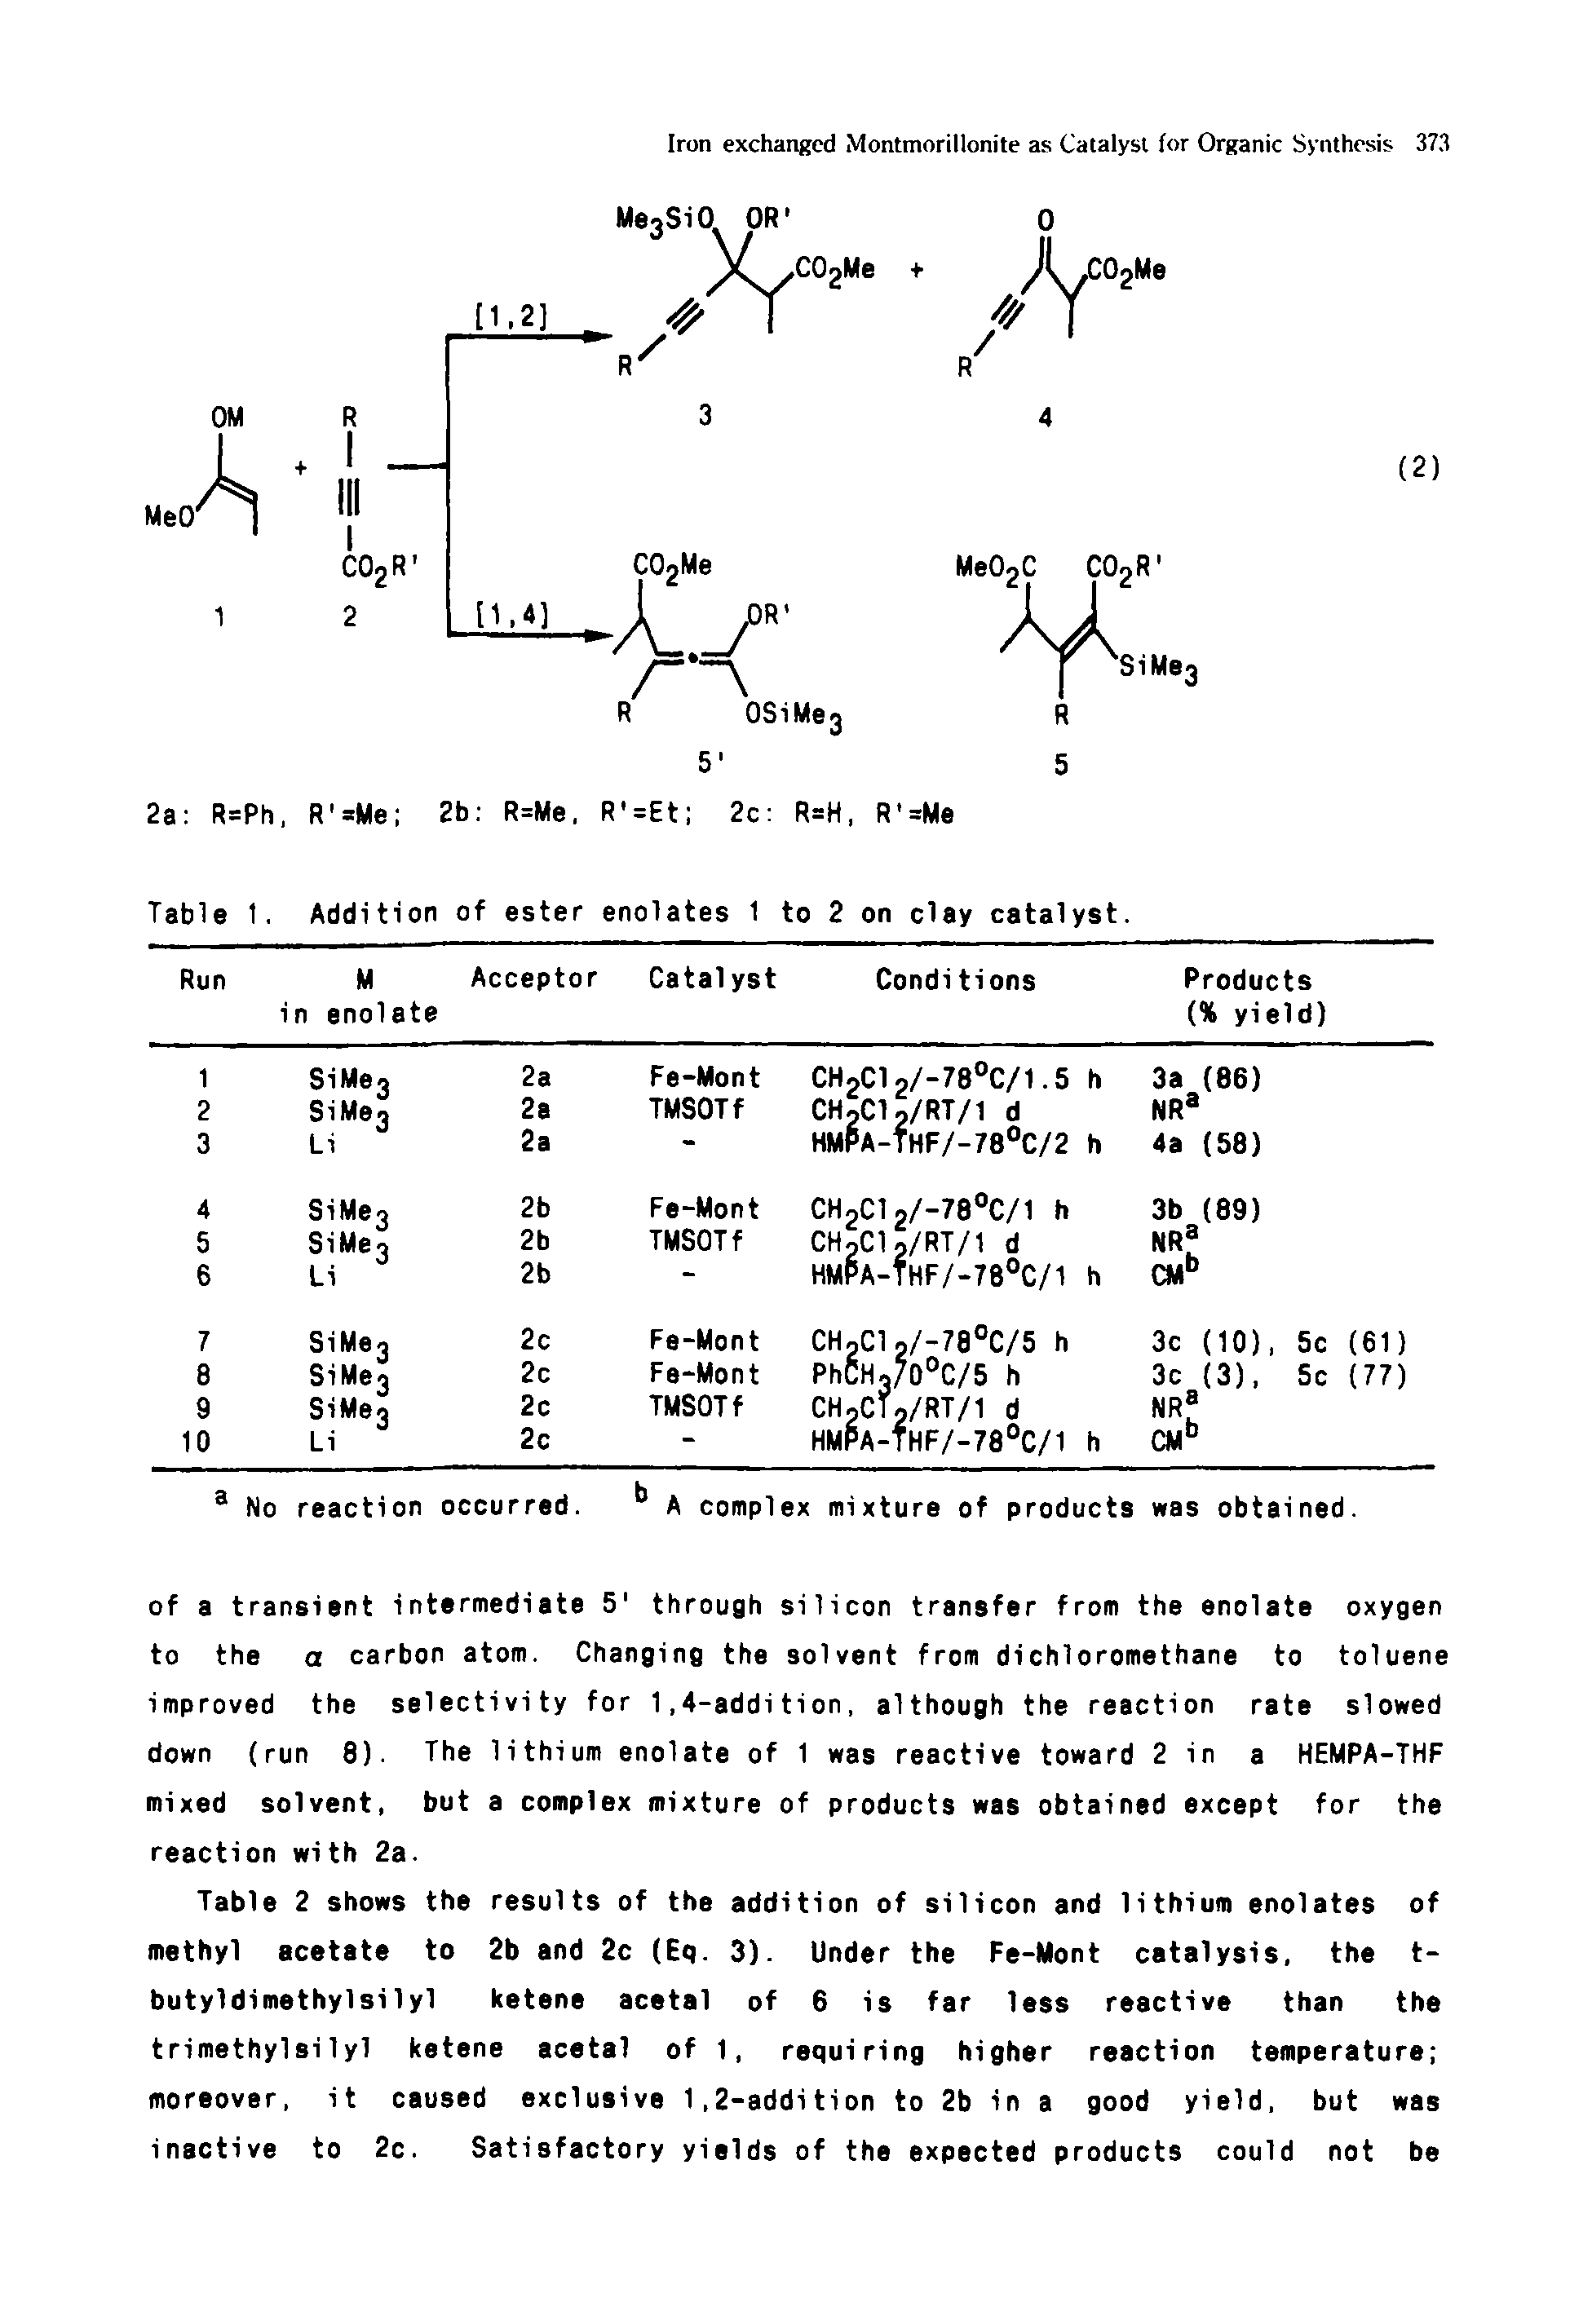 Table 1. Addition of ester enolates 1 to 2 on clay catalyst.